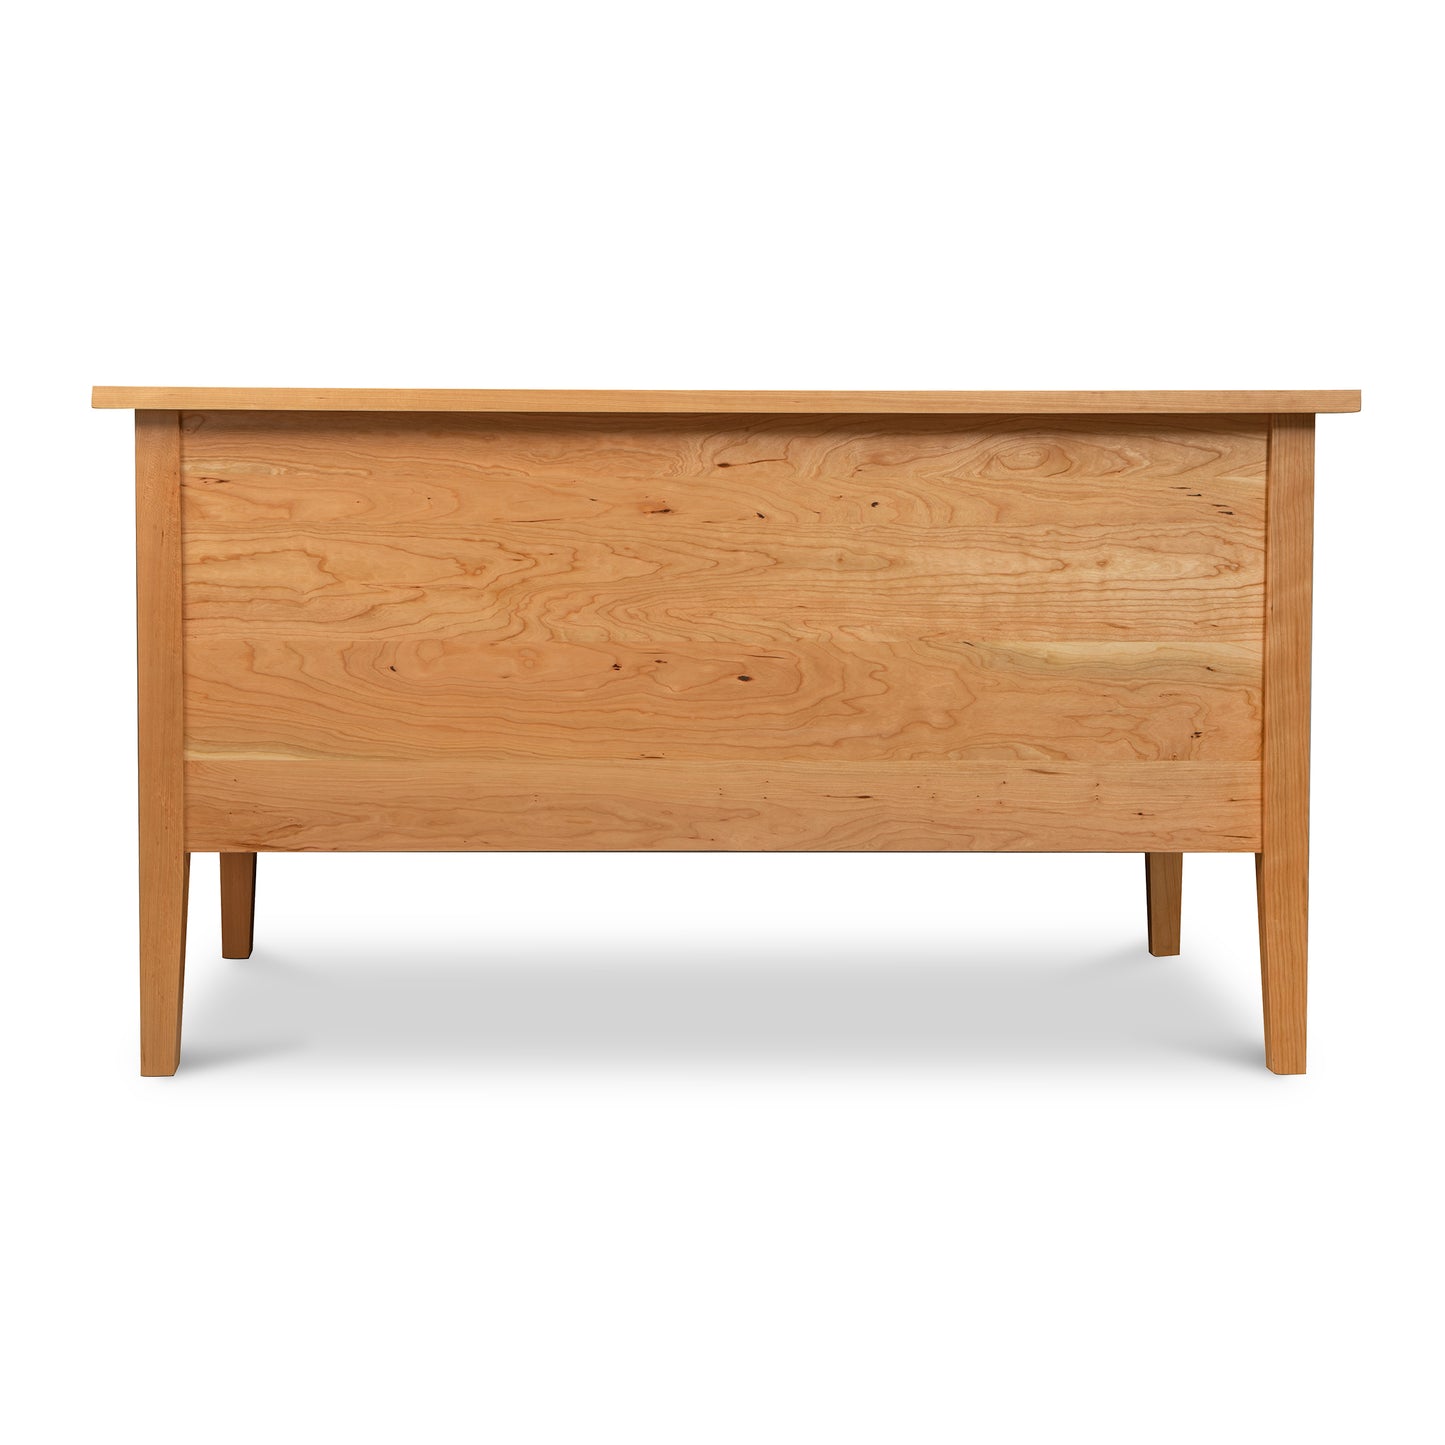 A Small Wood Executive Desk with a solid wood top by Lyndon Furniture.